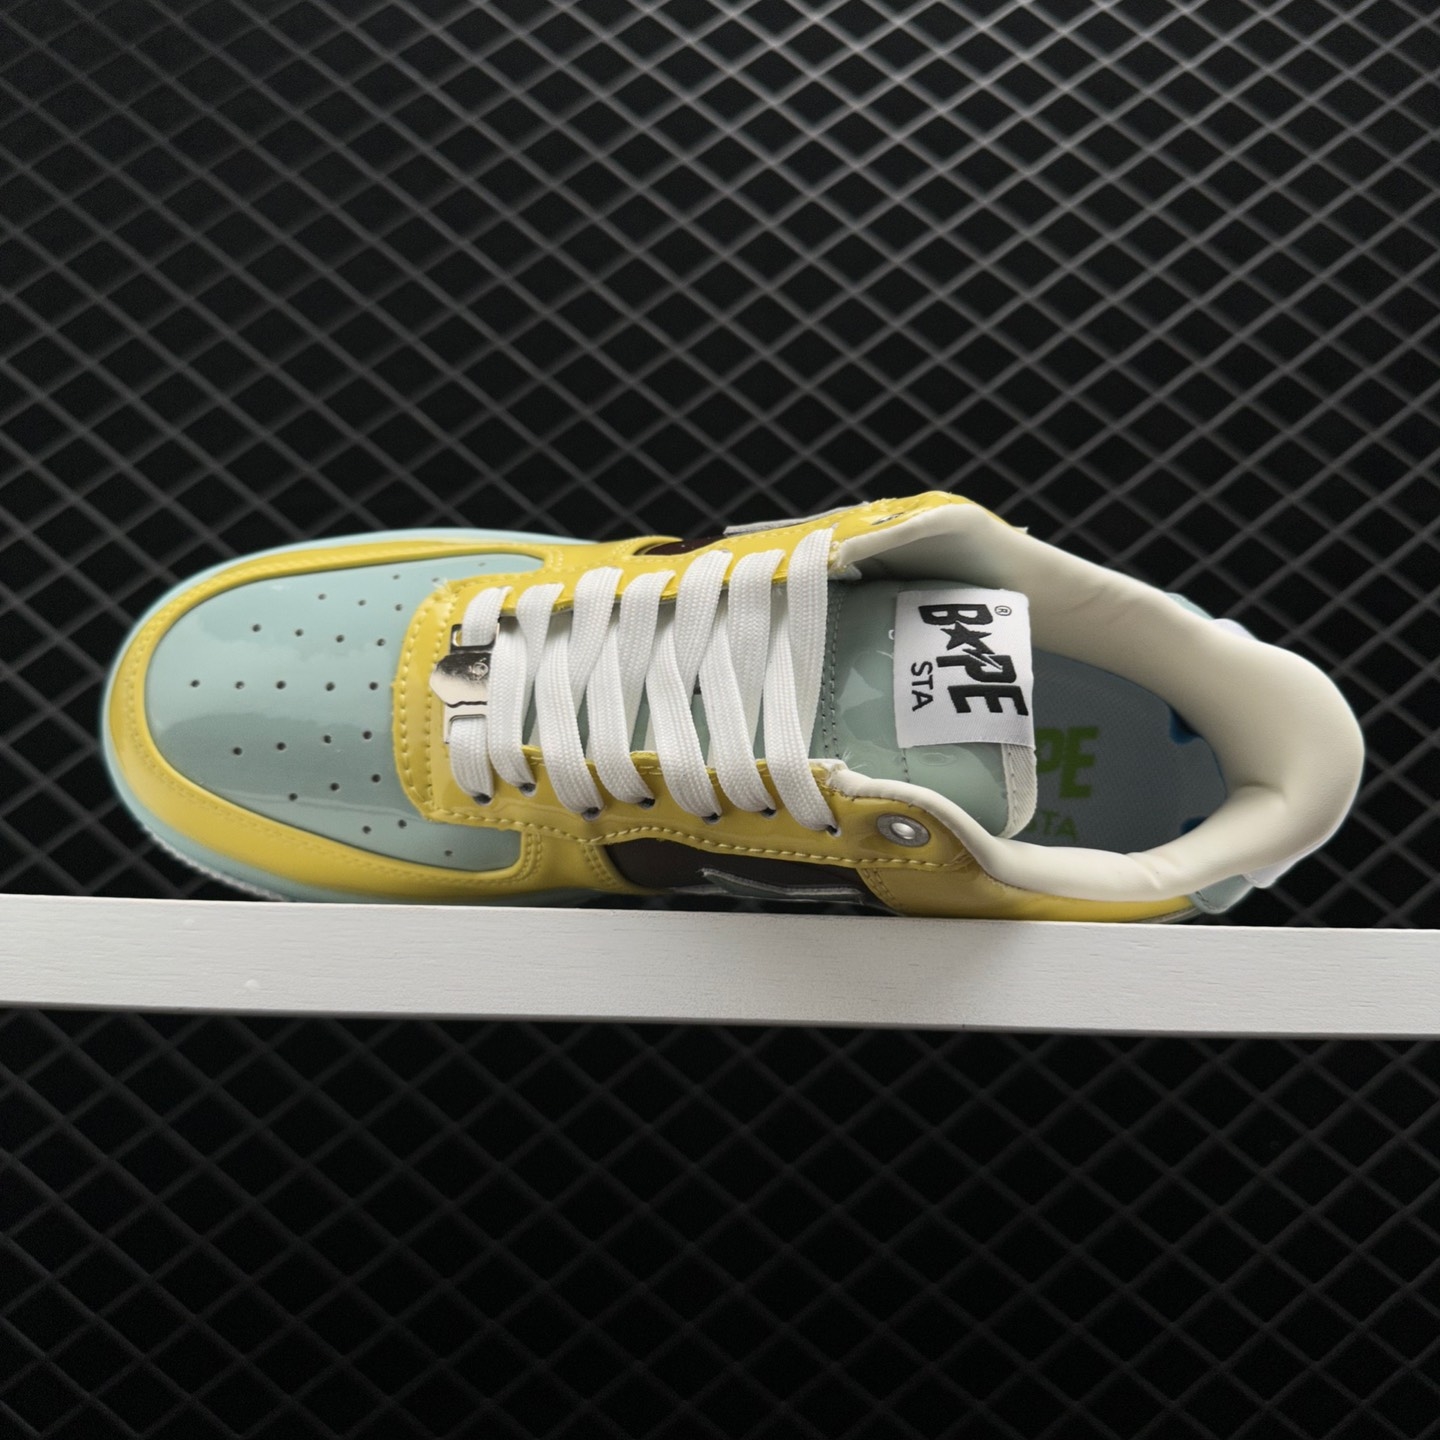 A BATHING APE Bape Sta 'Yellow Green' 1I80-191-006-YELLOW - Limited Edition Sneakers